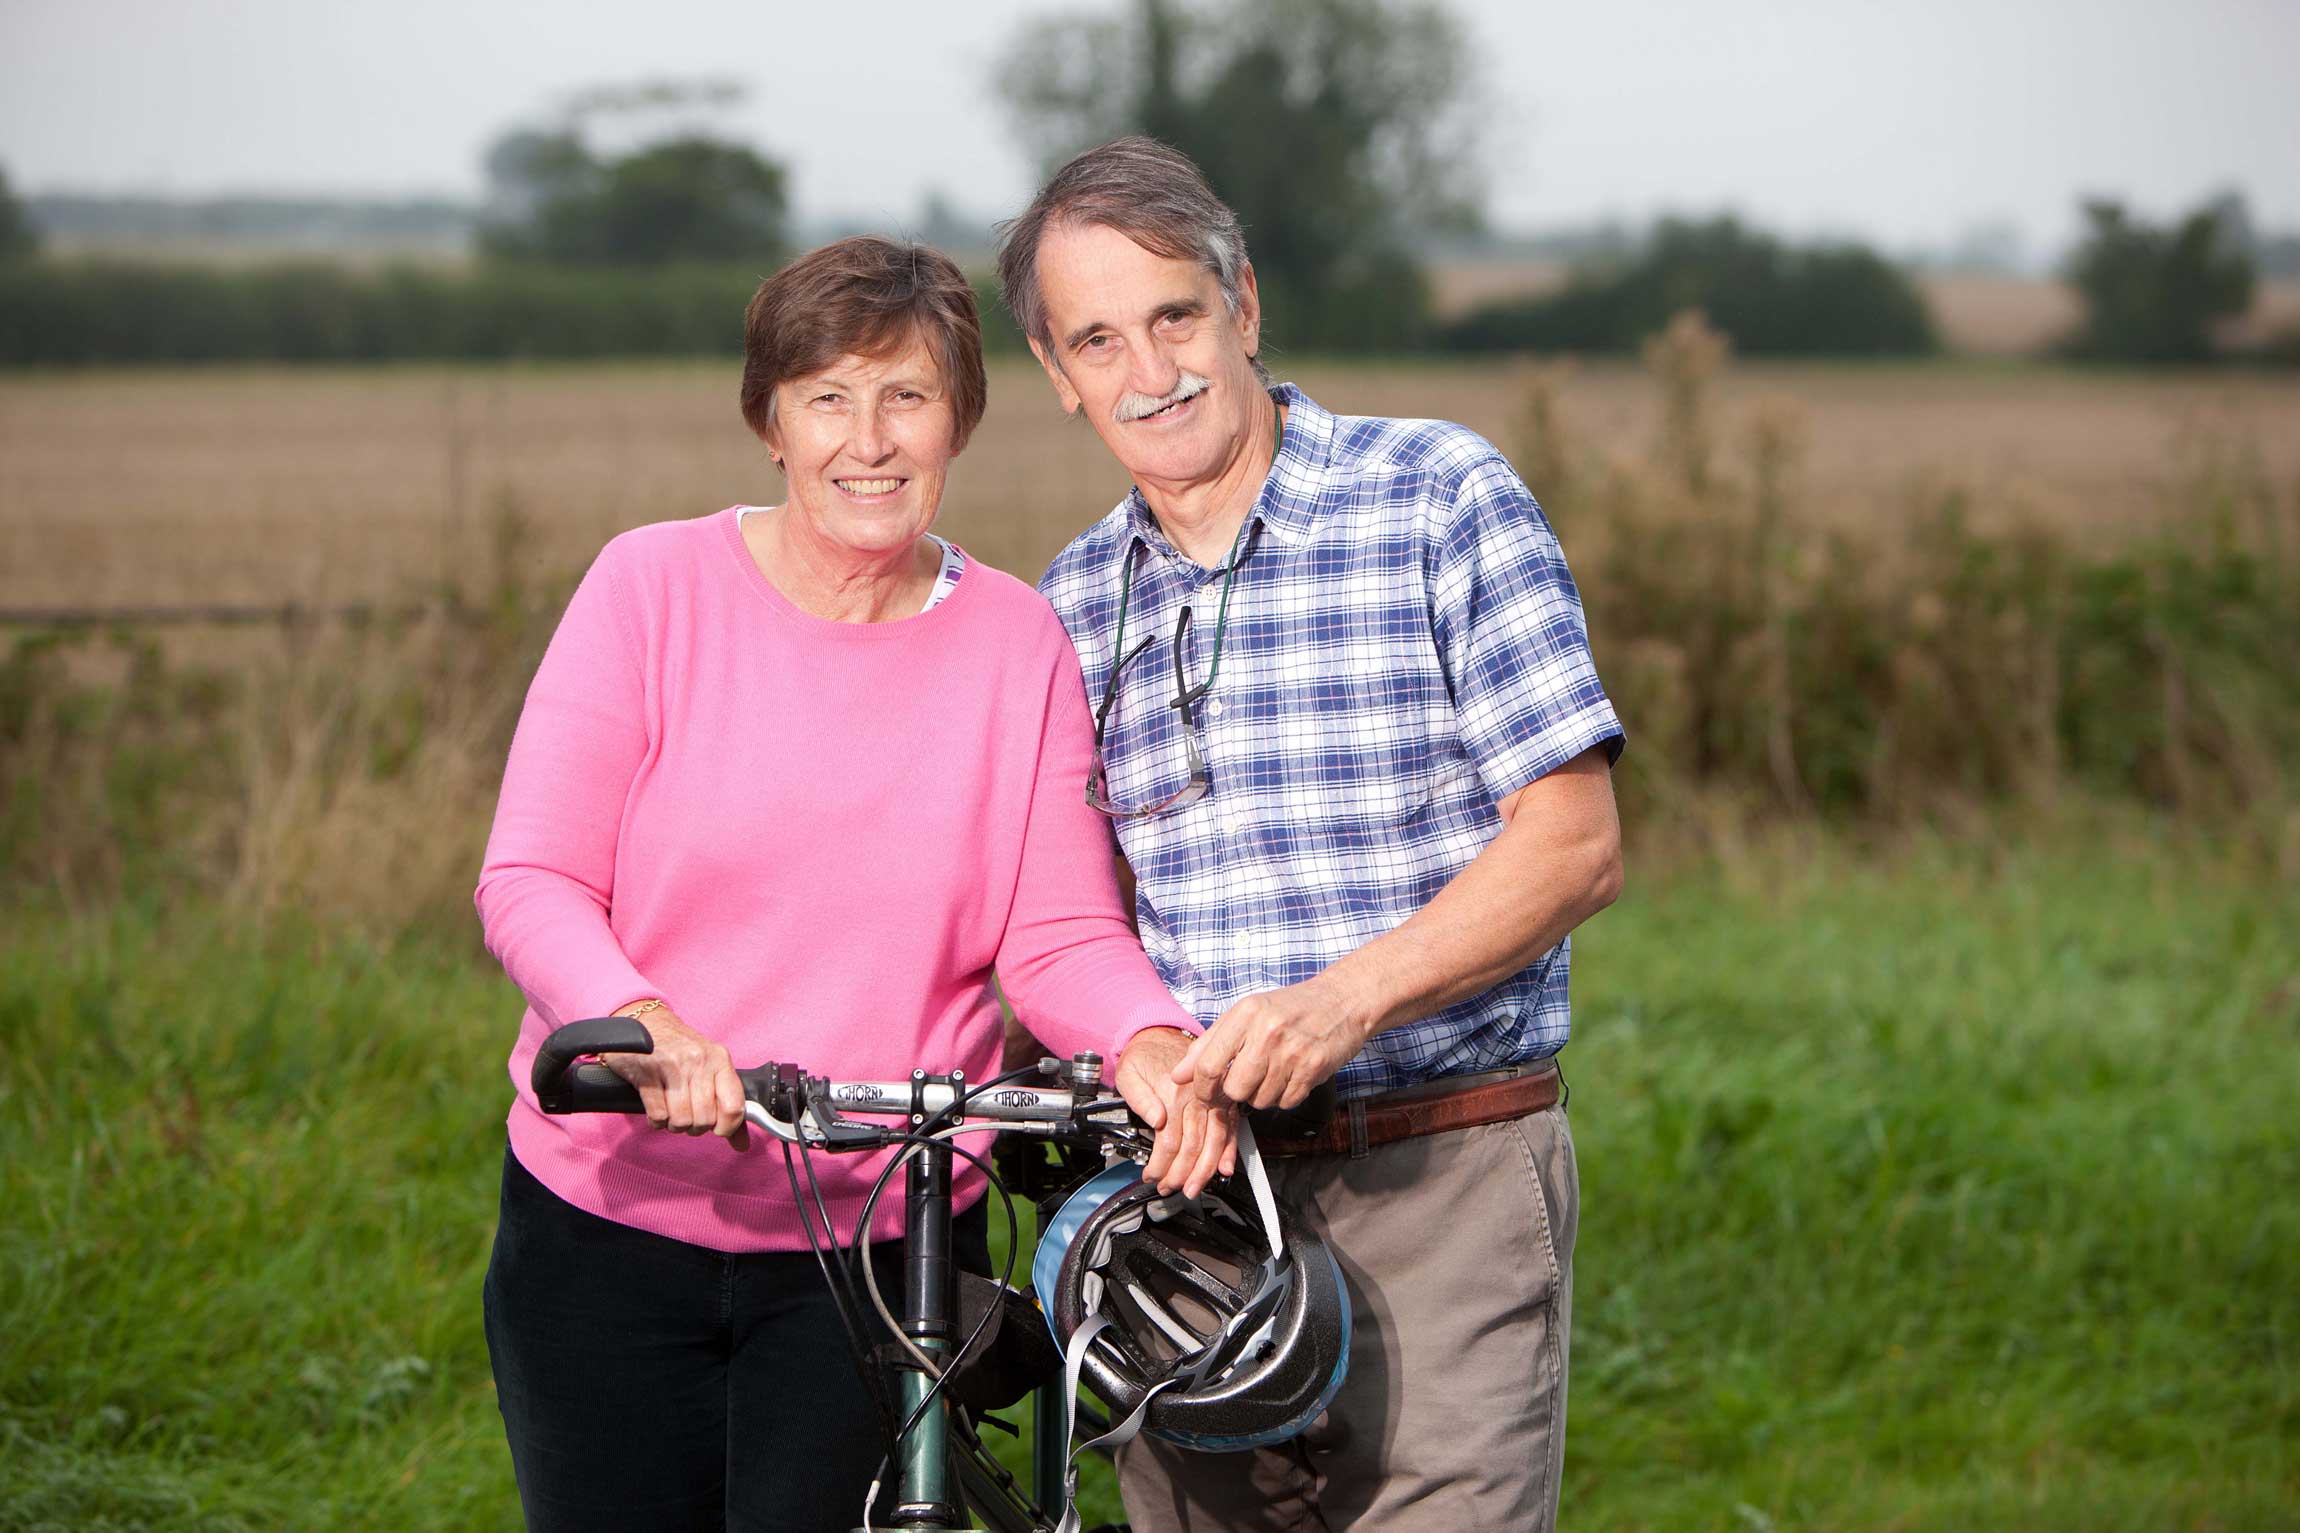 Karen Coram is now looking forward to riding tandem with her husband Bruce following her accident – but her family have banned her from riding alone